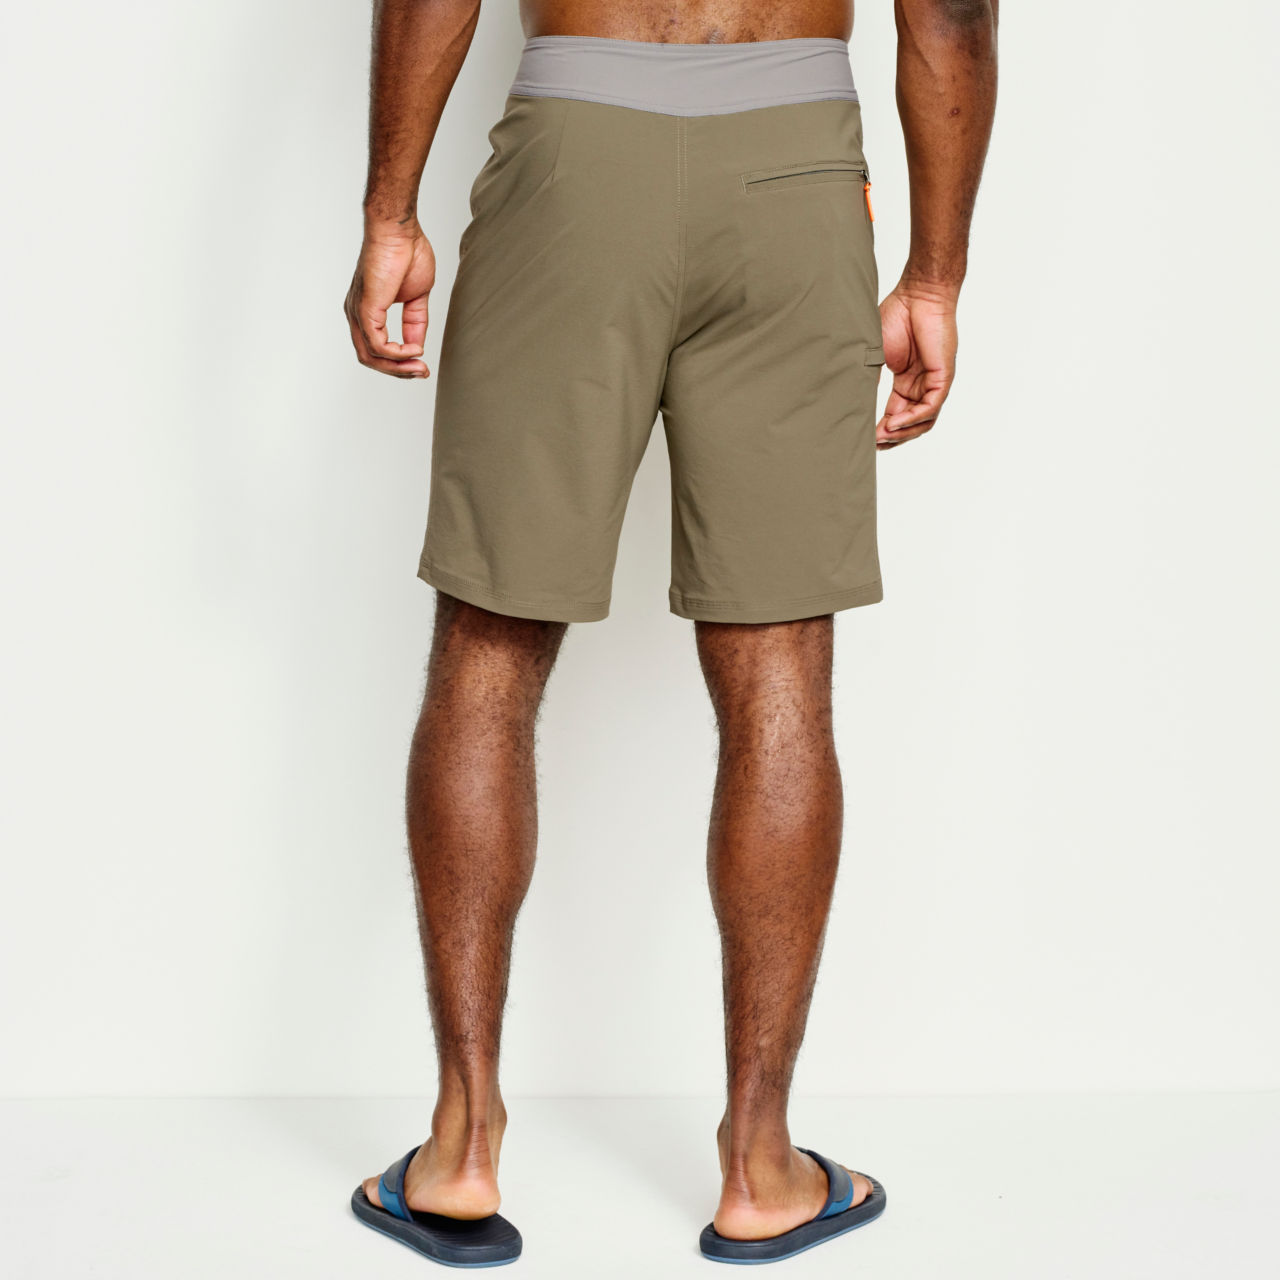 Jackson Quick-Dry Board Shorts -  image number 4